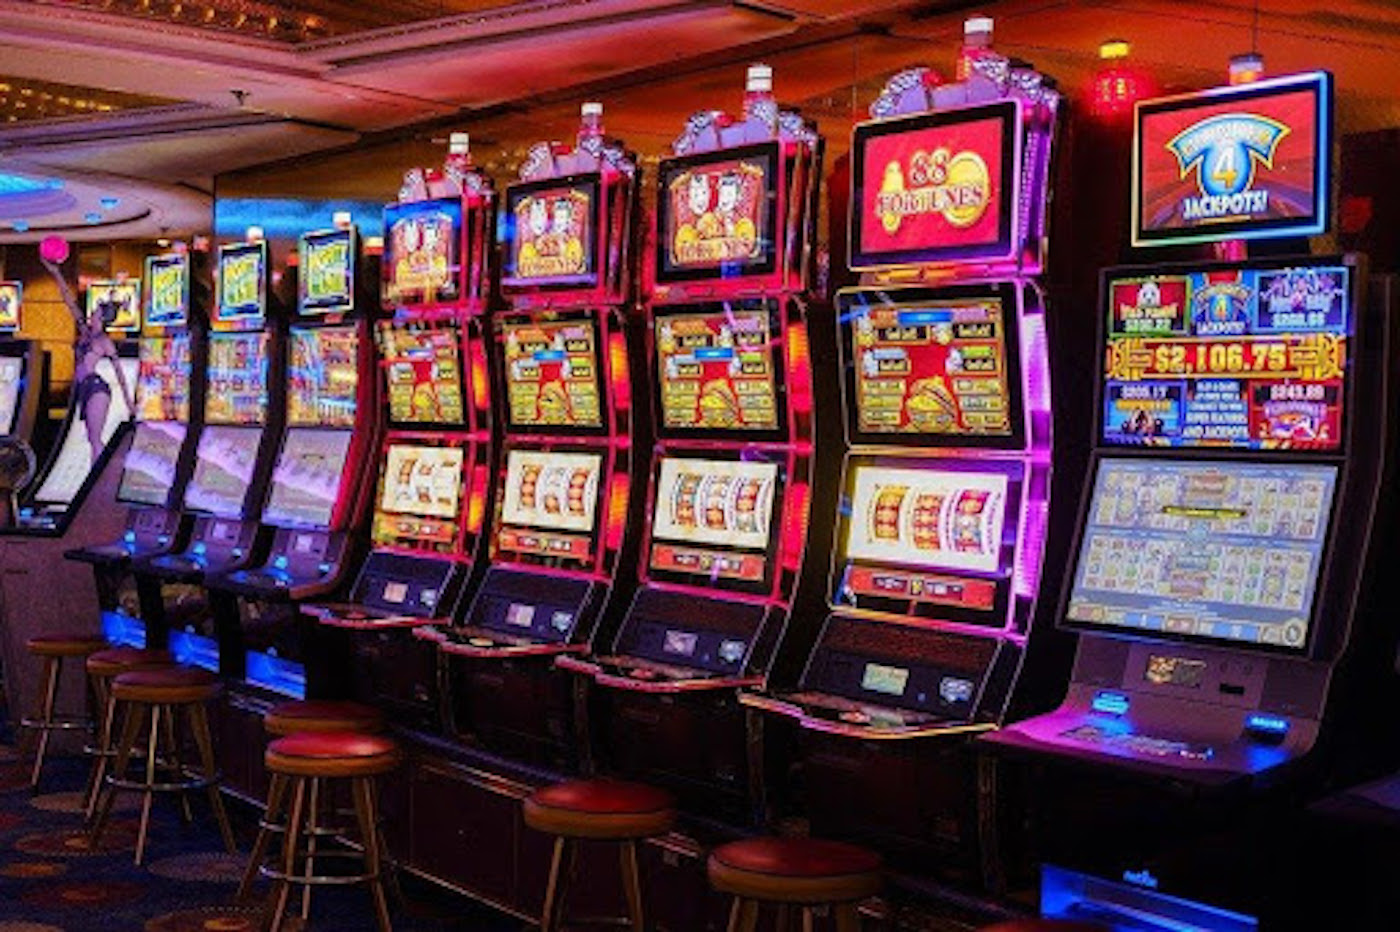 Are there any strategies or tips for winning at WebSlots?